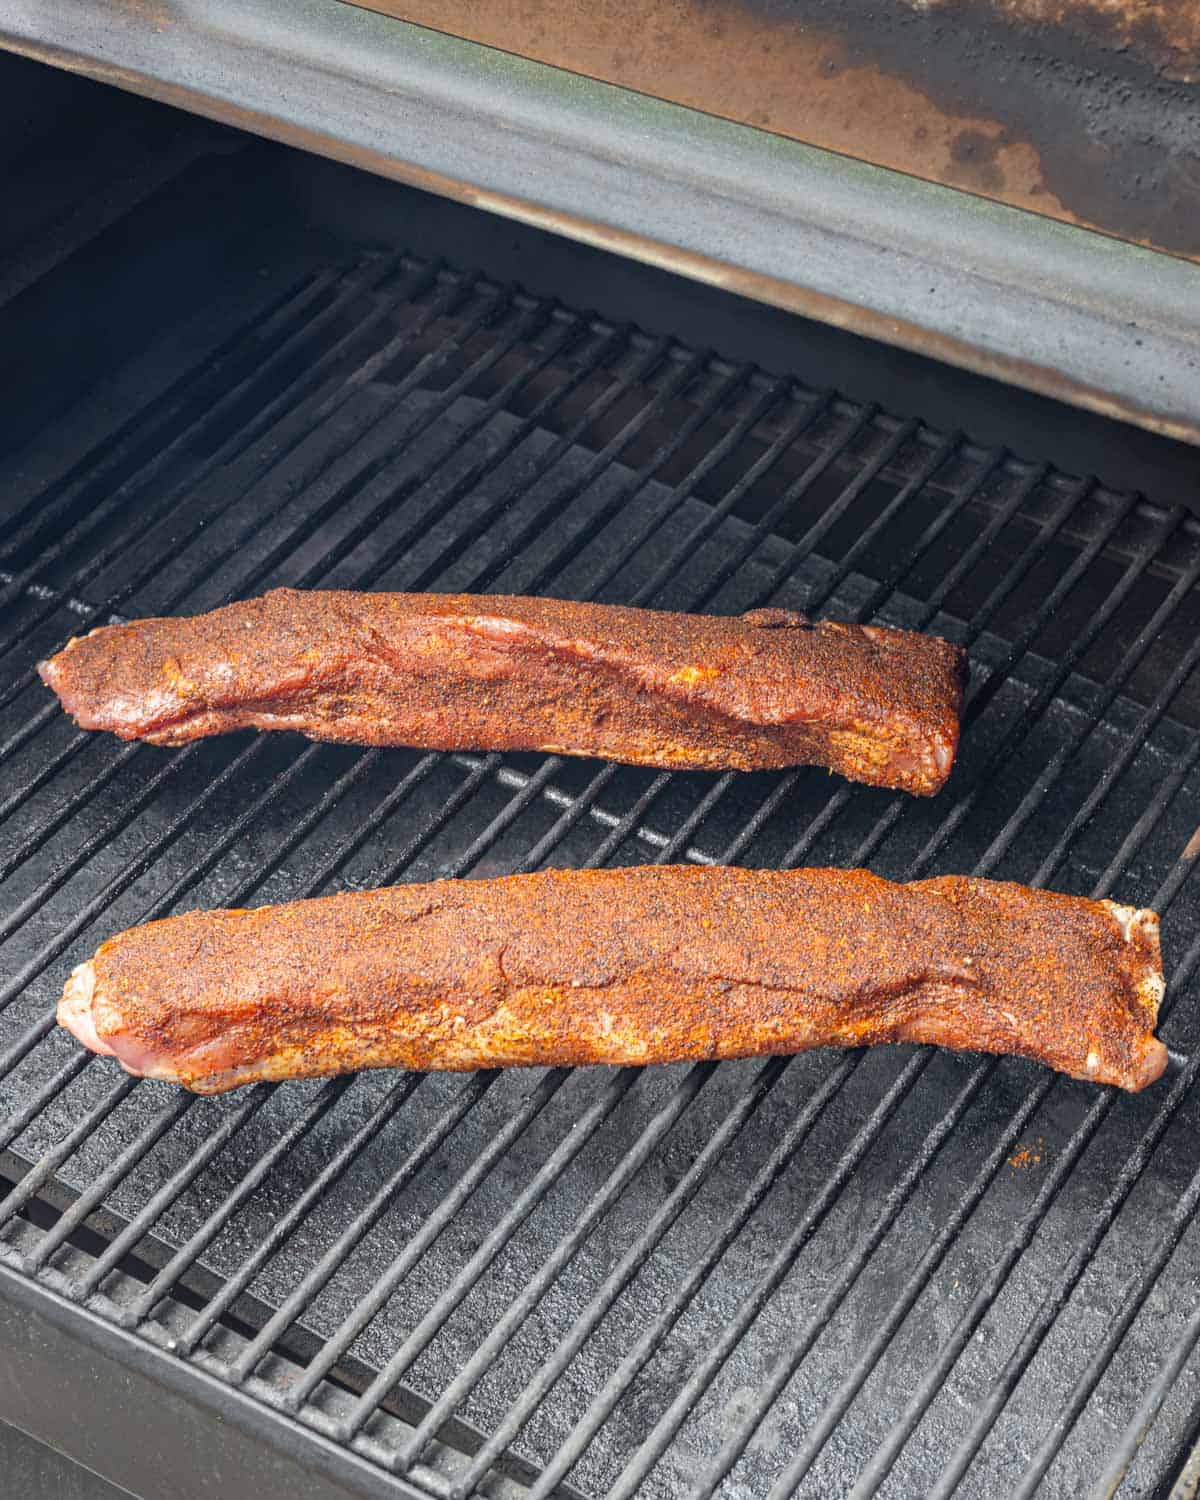 Pair of seasoned pork tenderloins placed on the smoker grill grates at the start of cooking.